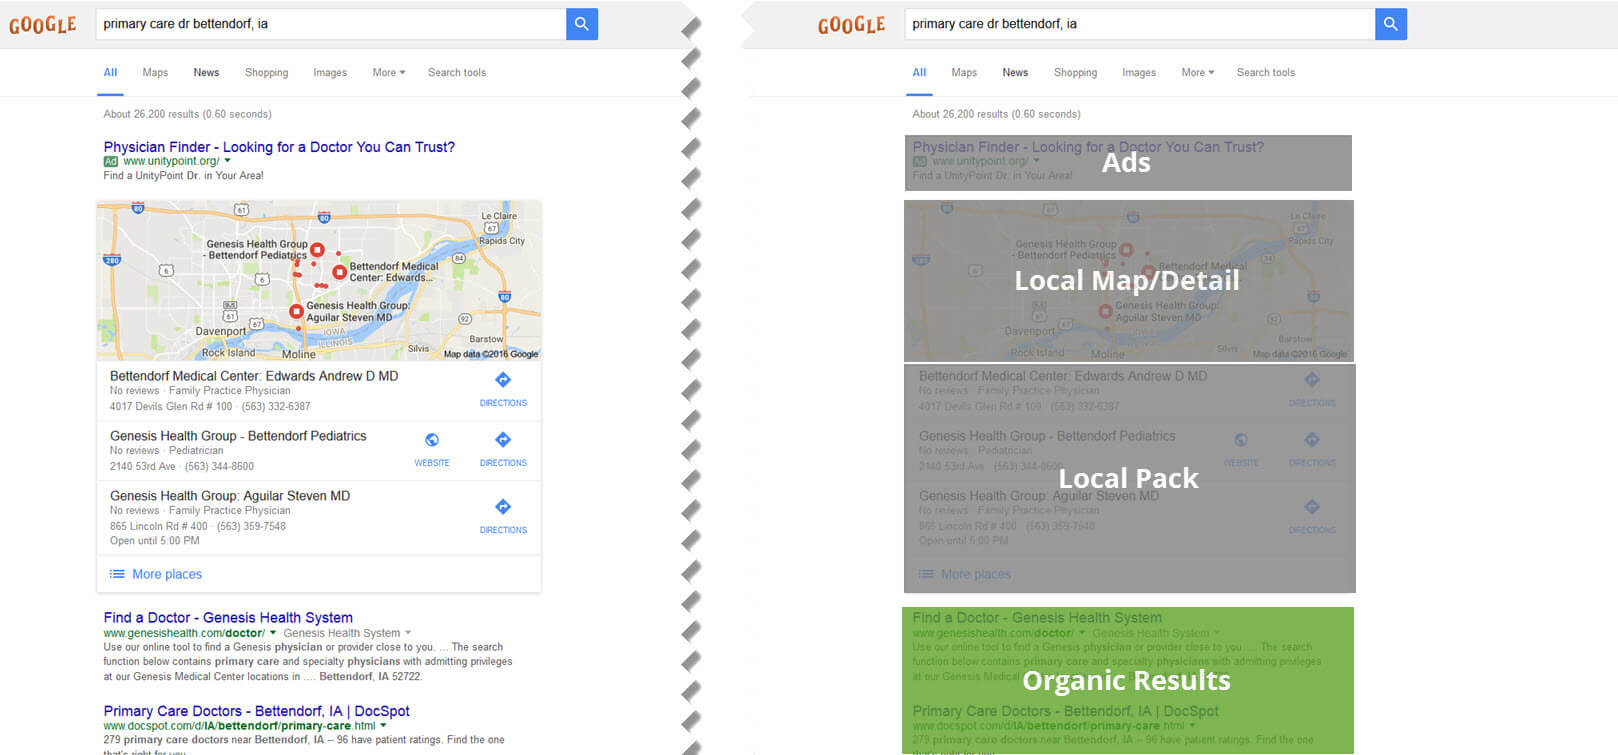 Snapshot of Google search results page